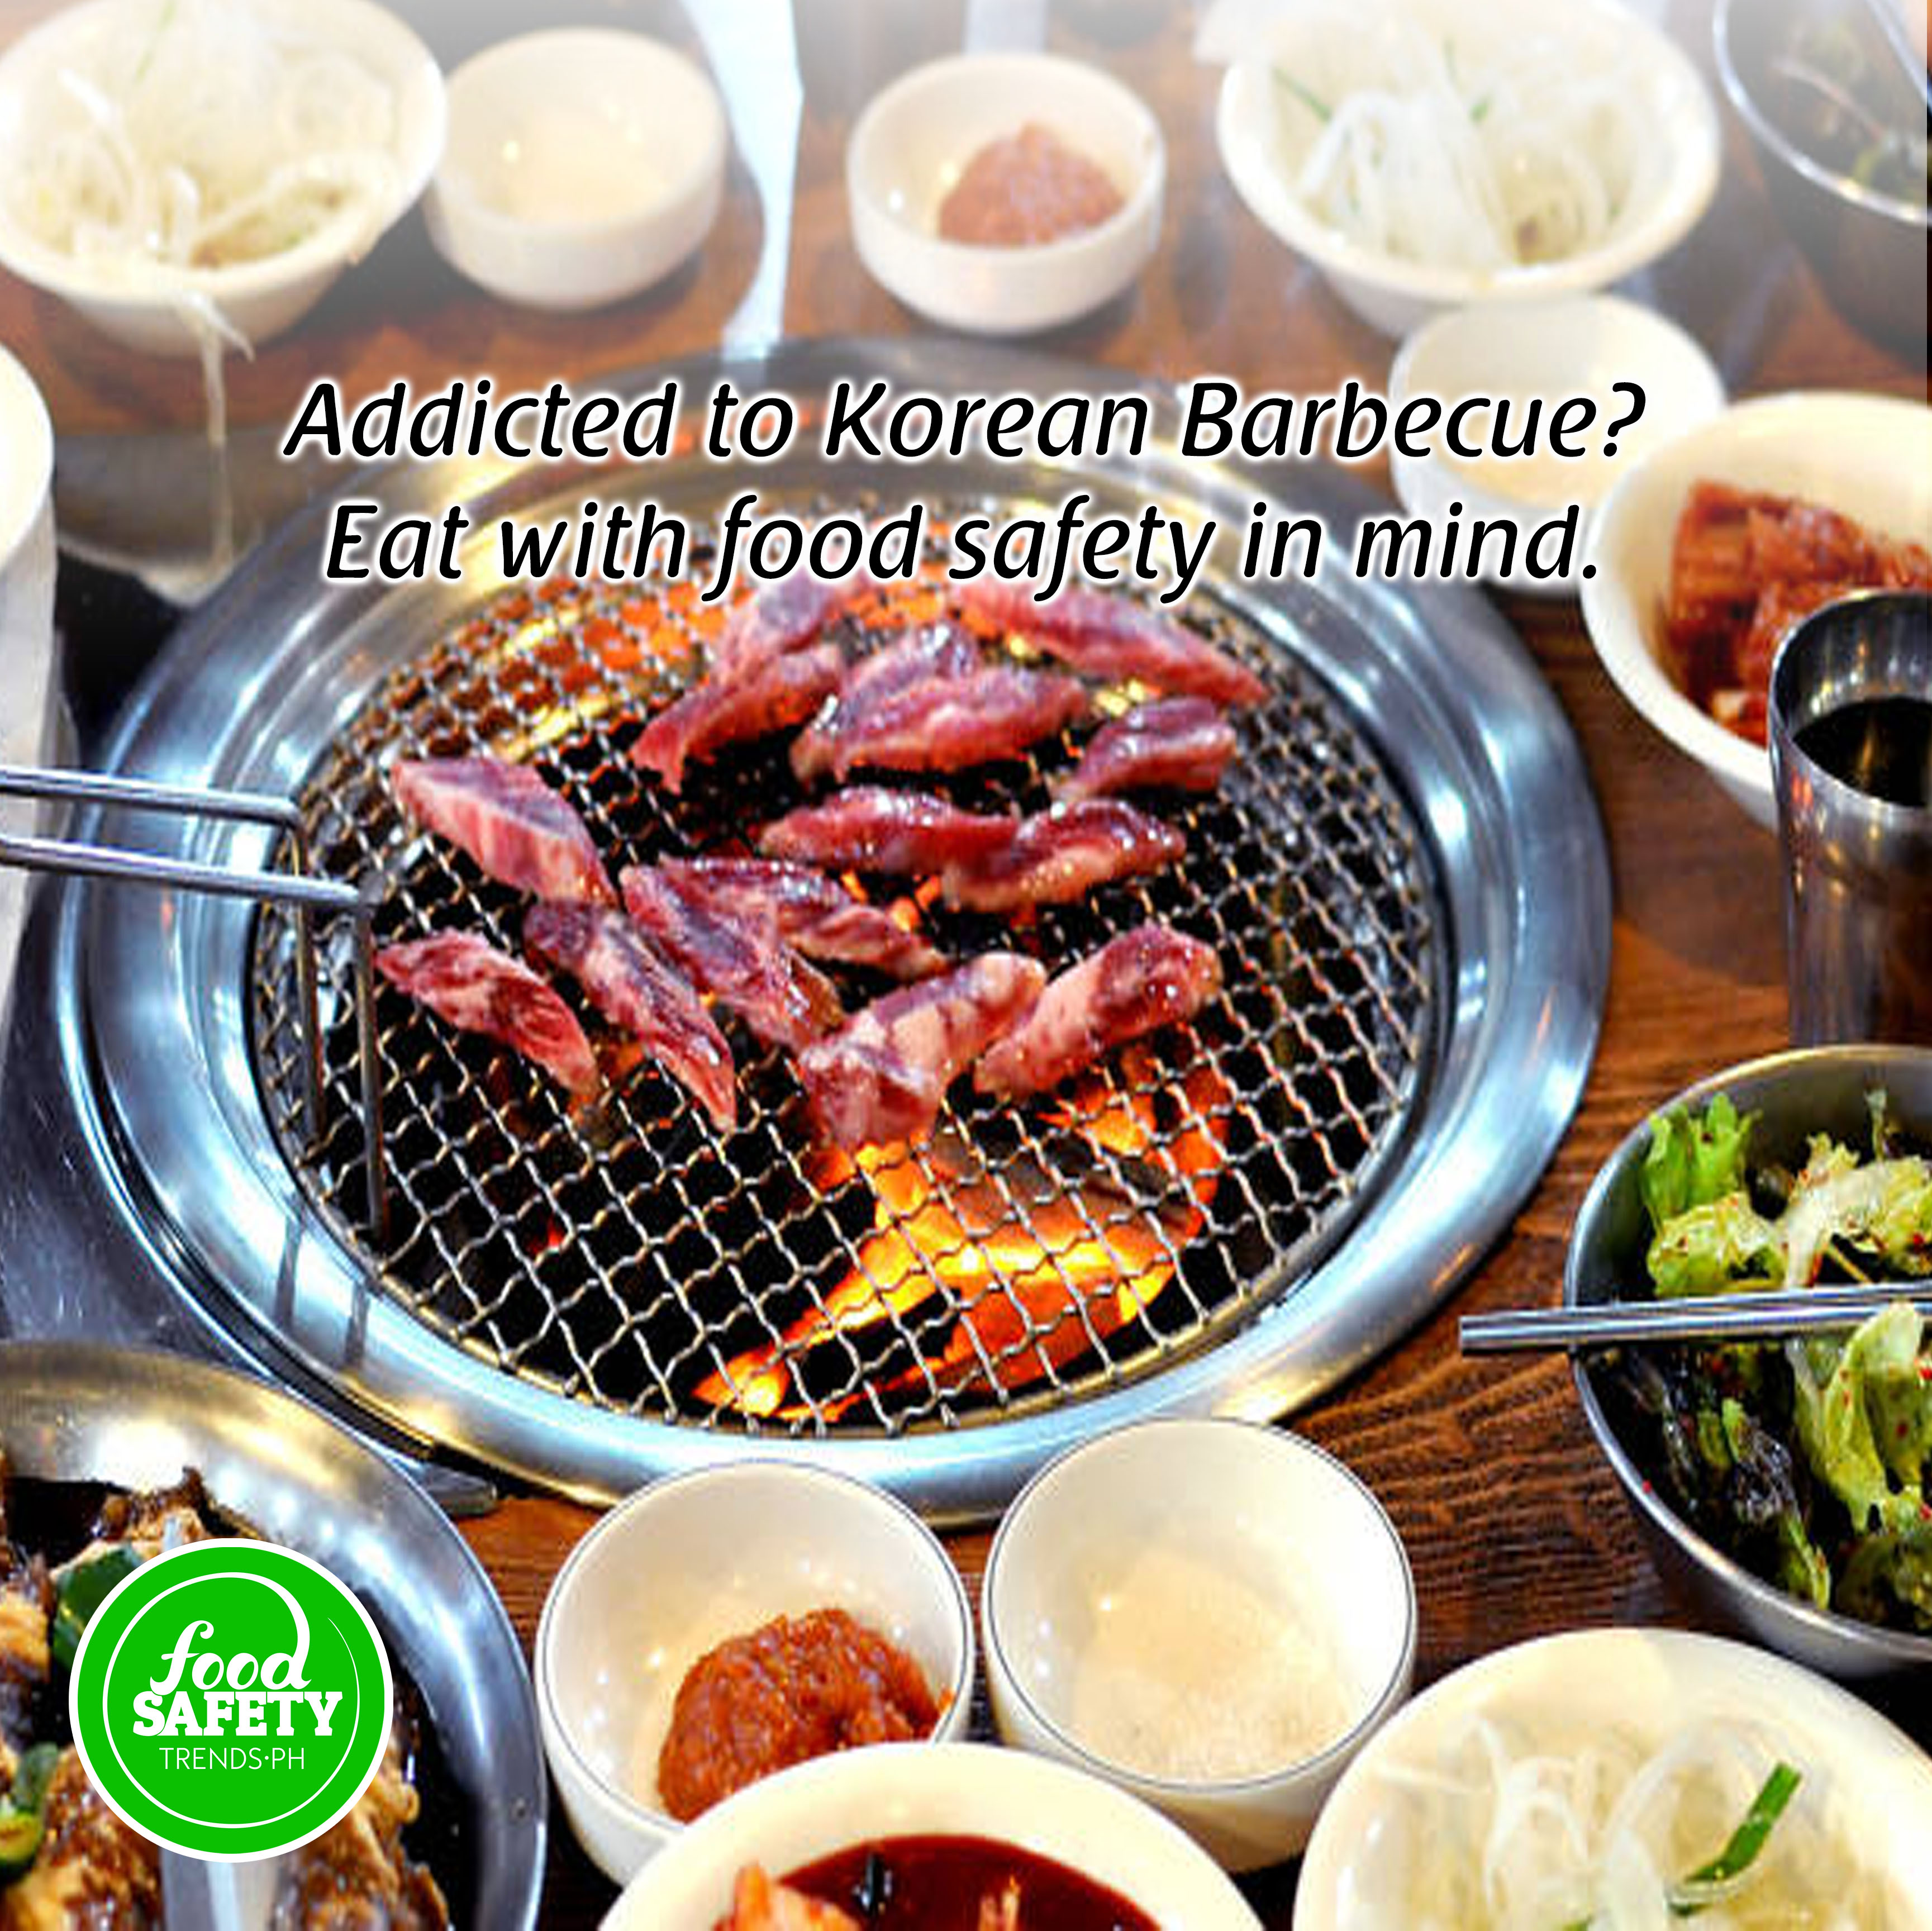 Addicted with Korean Barbecue? Eat with food safety in mind.